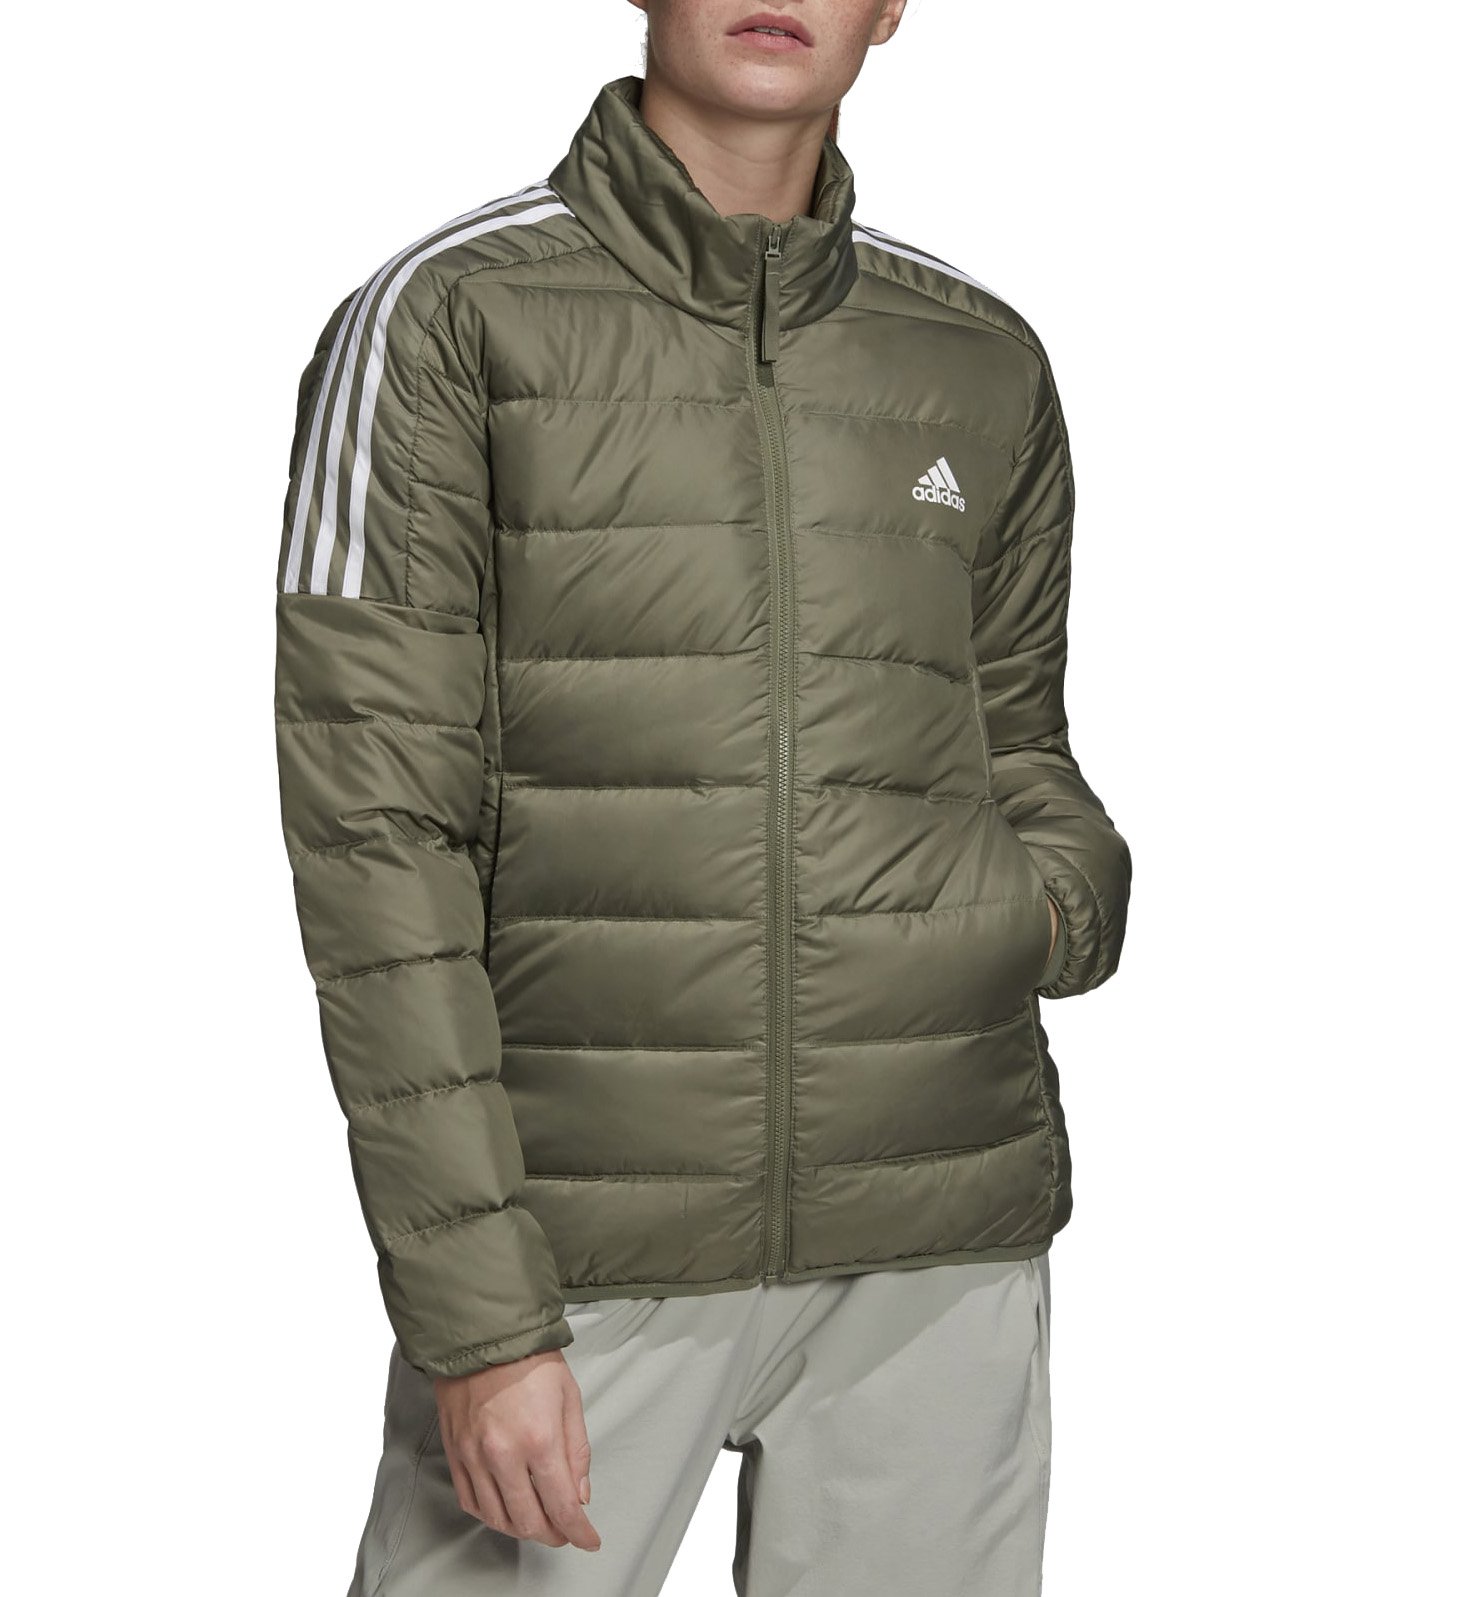 Adidas Women's W Essentials Down Jacket, Legacy Green - image 1 of 1